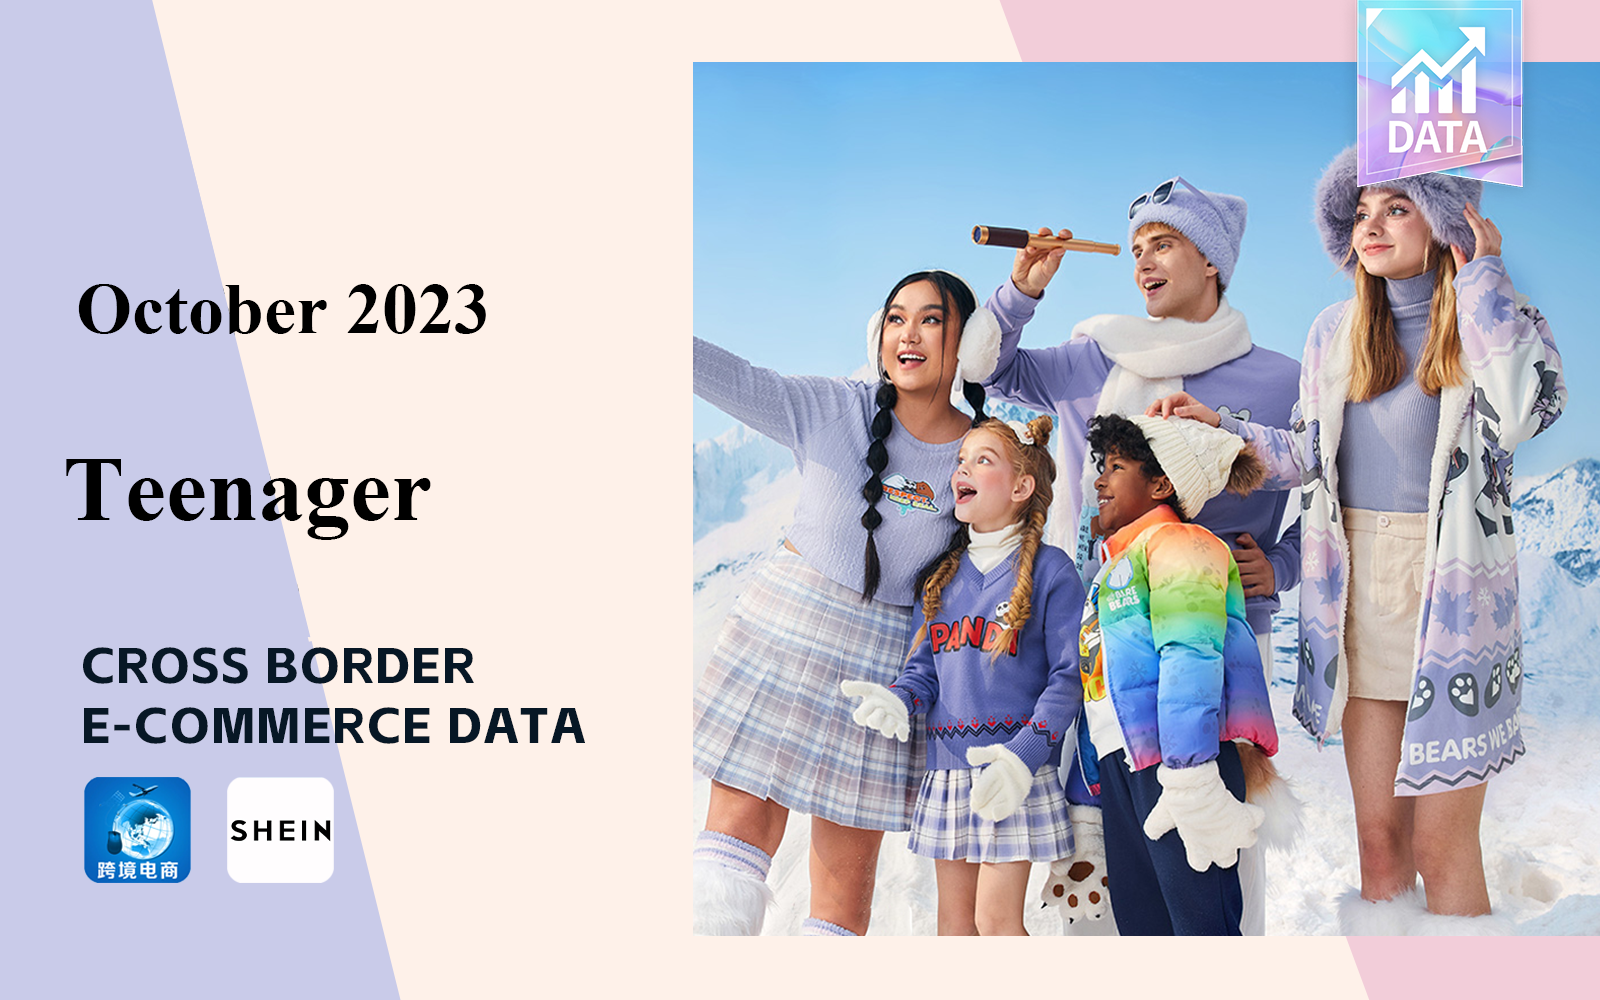 SHEIN -- The Cross-Border E-Commerce Data Analysis of Teenage Clothing in October